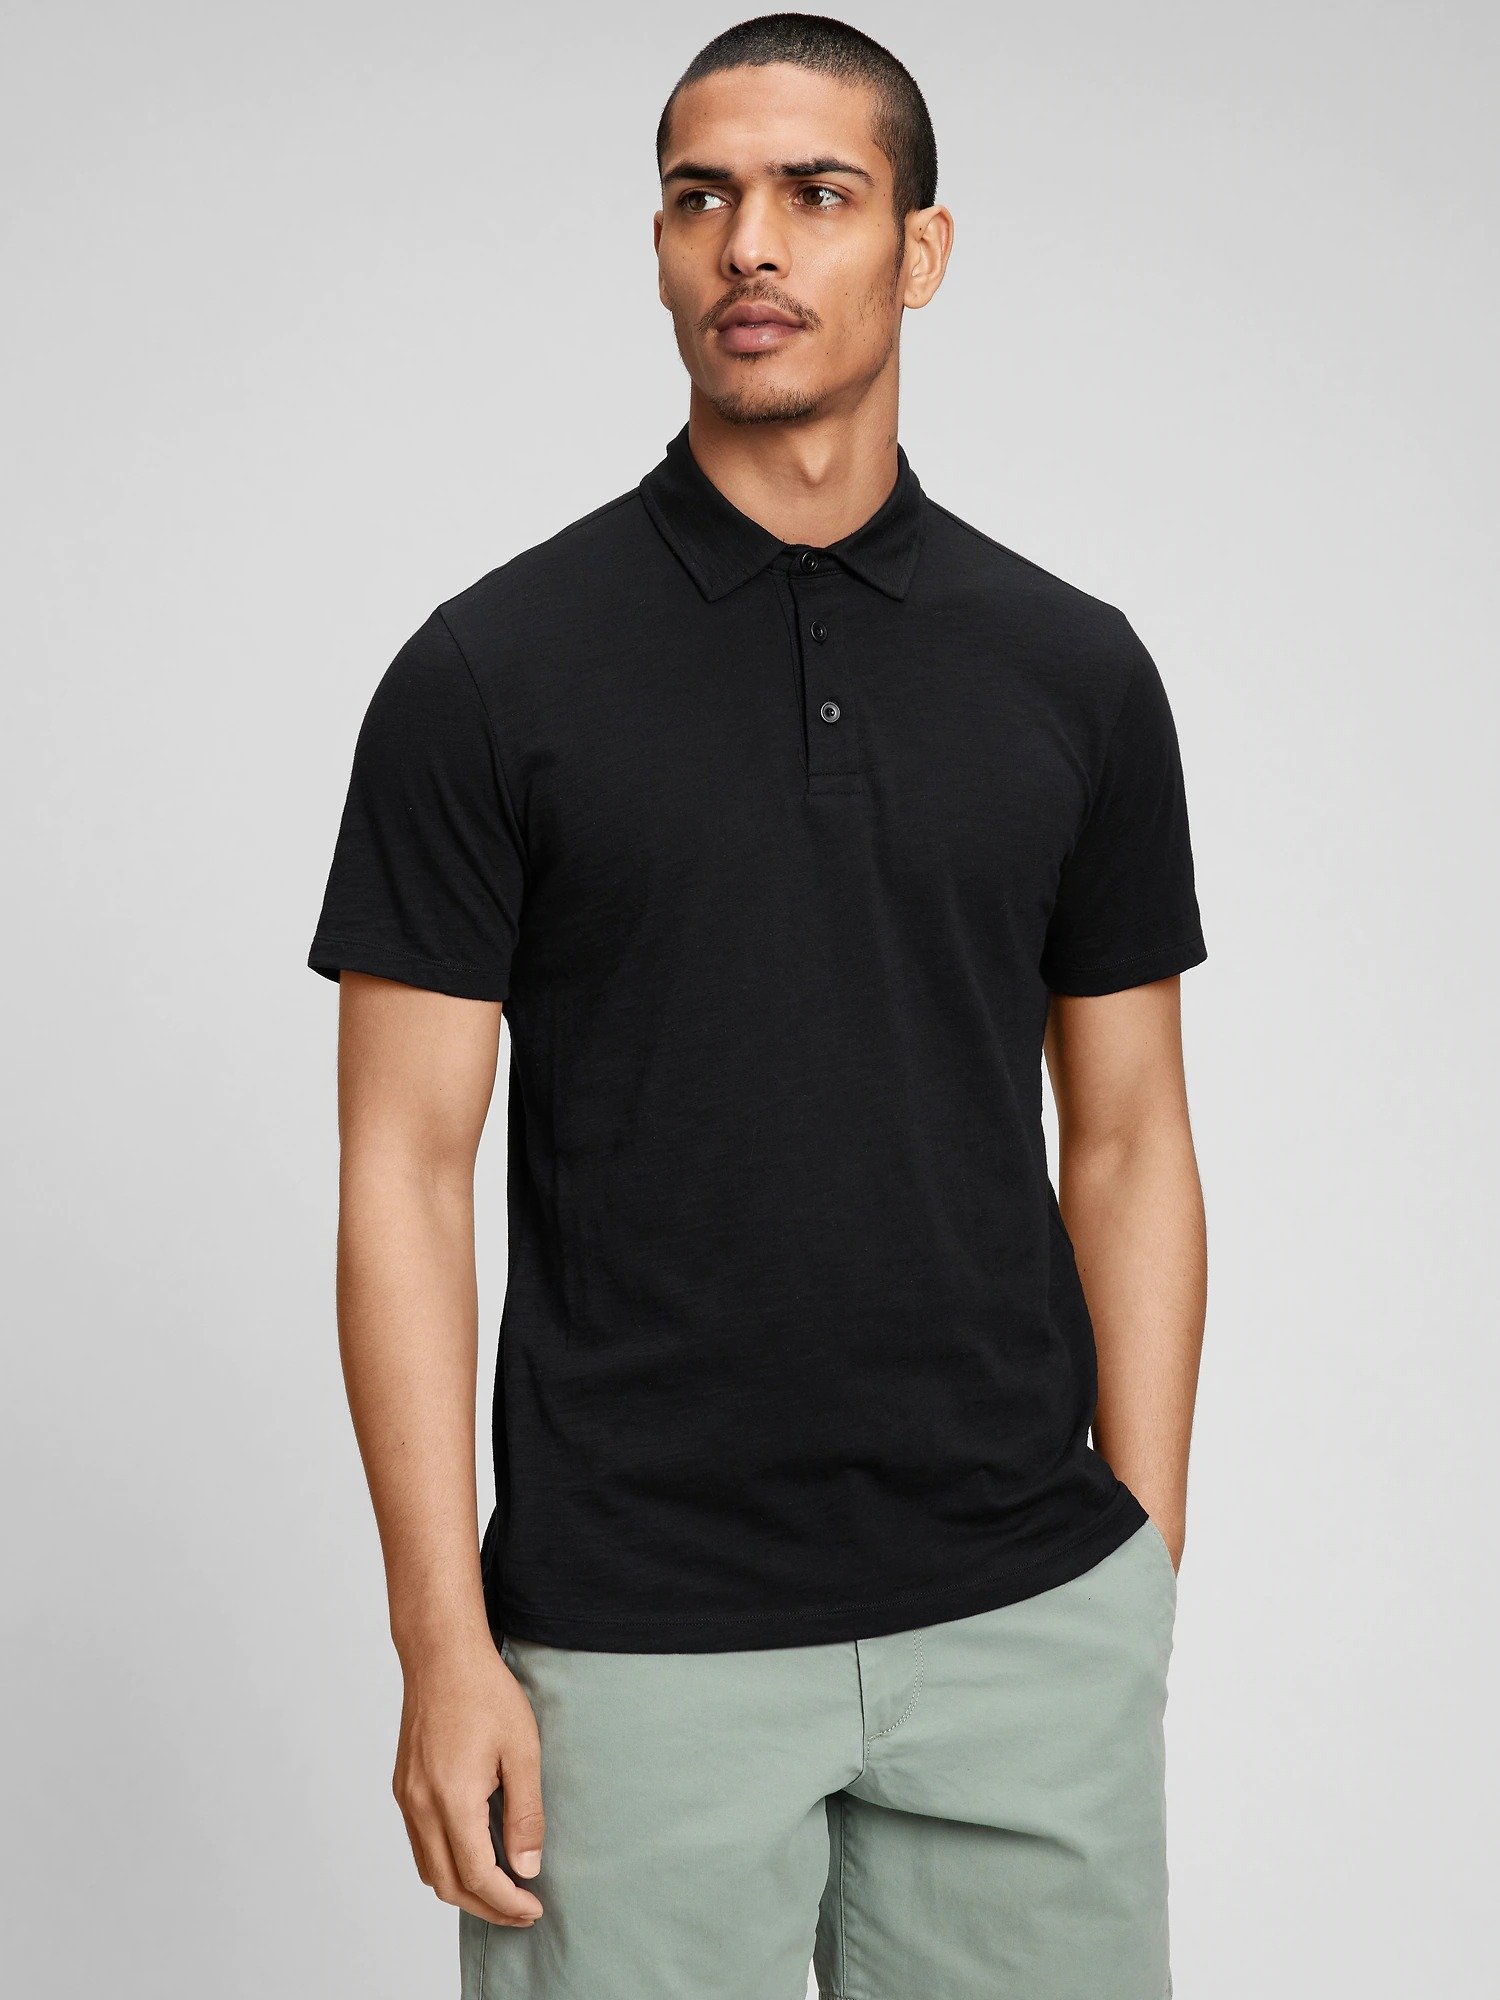 Lived In Polo T-Shirt product image